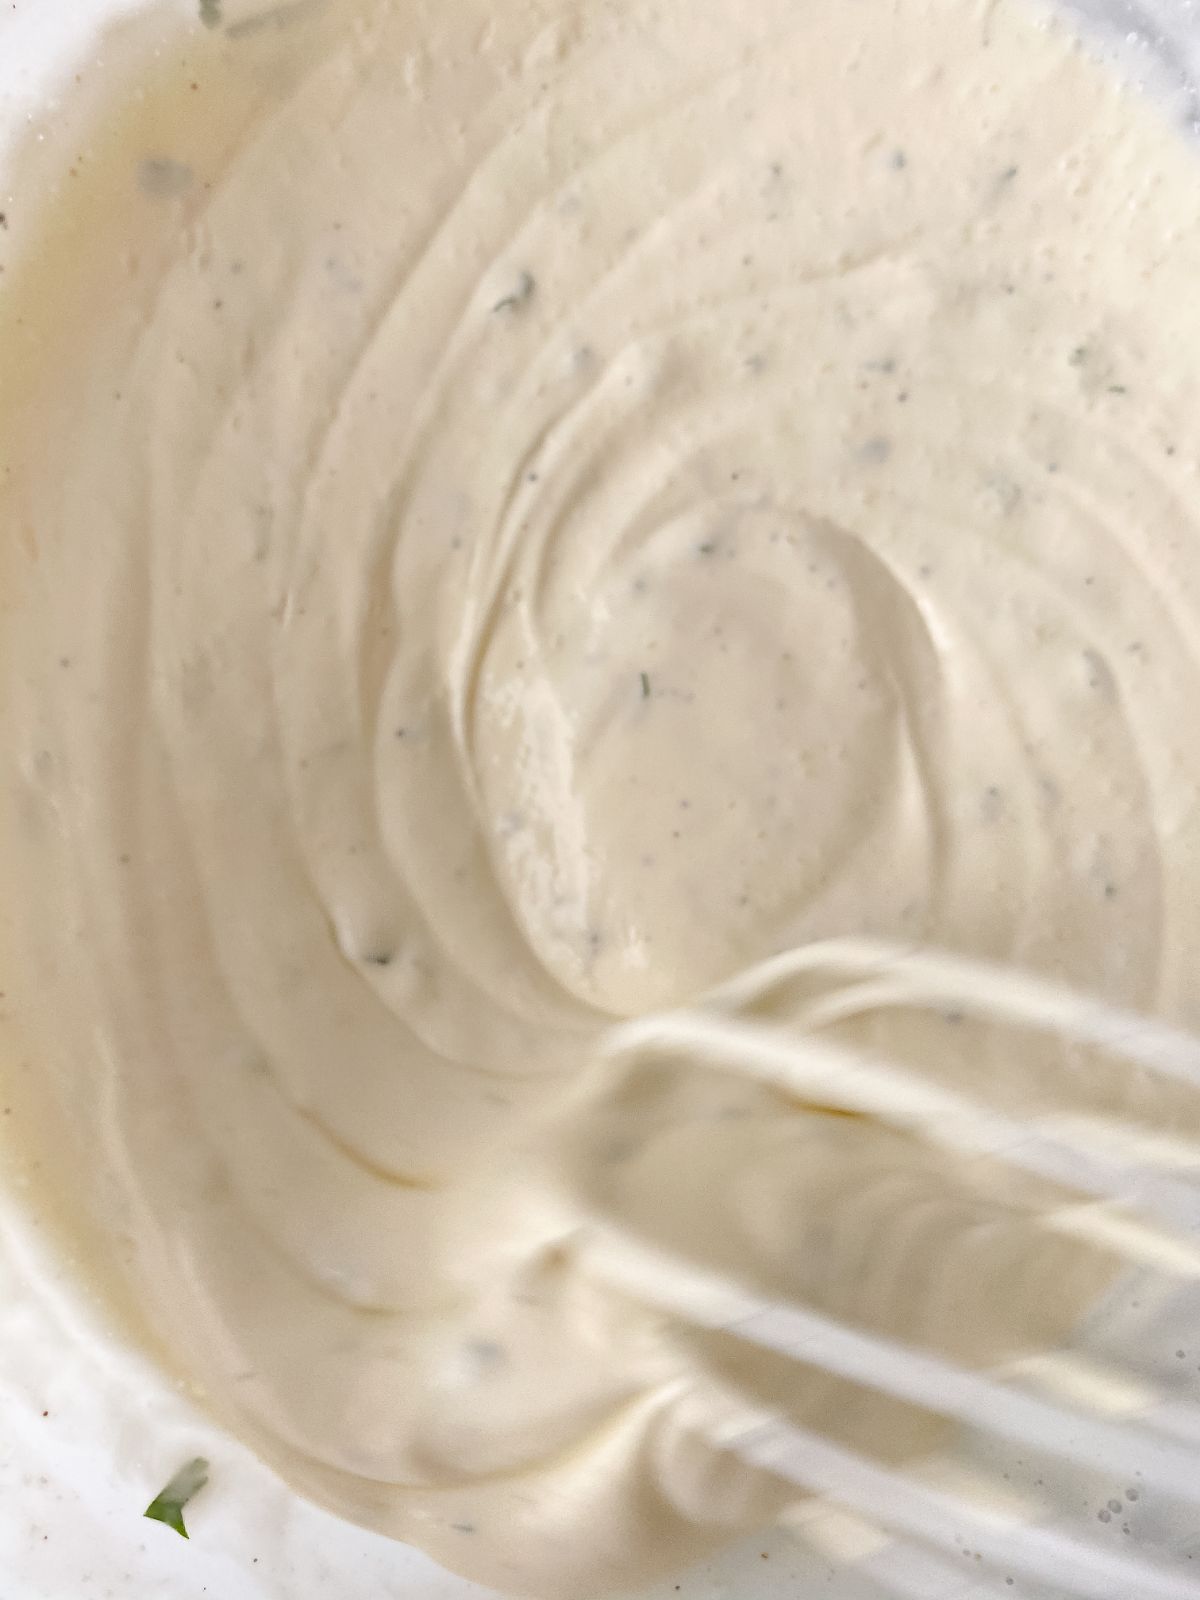 whisk in bowl of creamy sauce